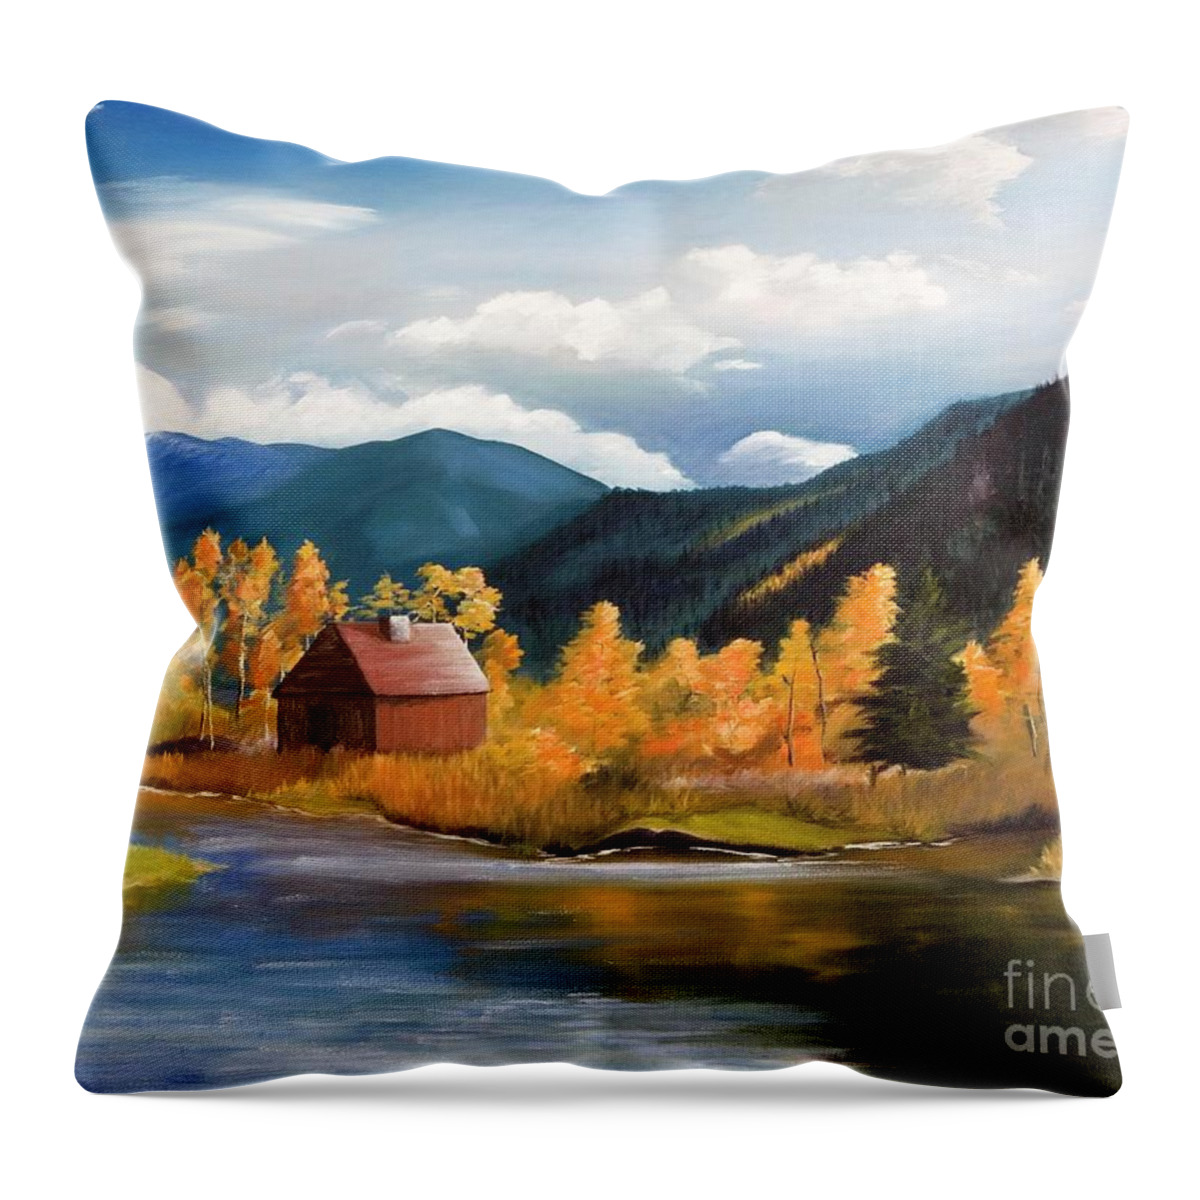 Mountains Throw Pillow featuring the painting Mountain Lake by Wendy Golden